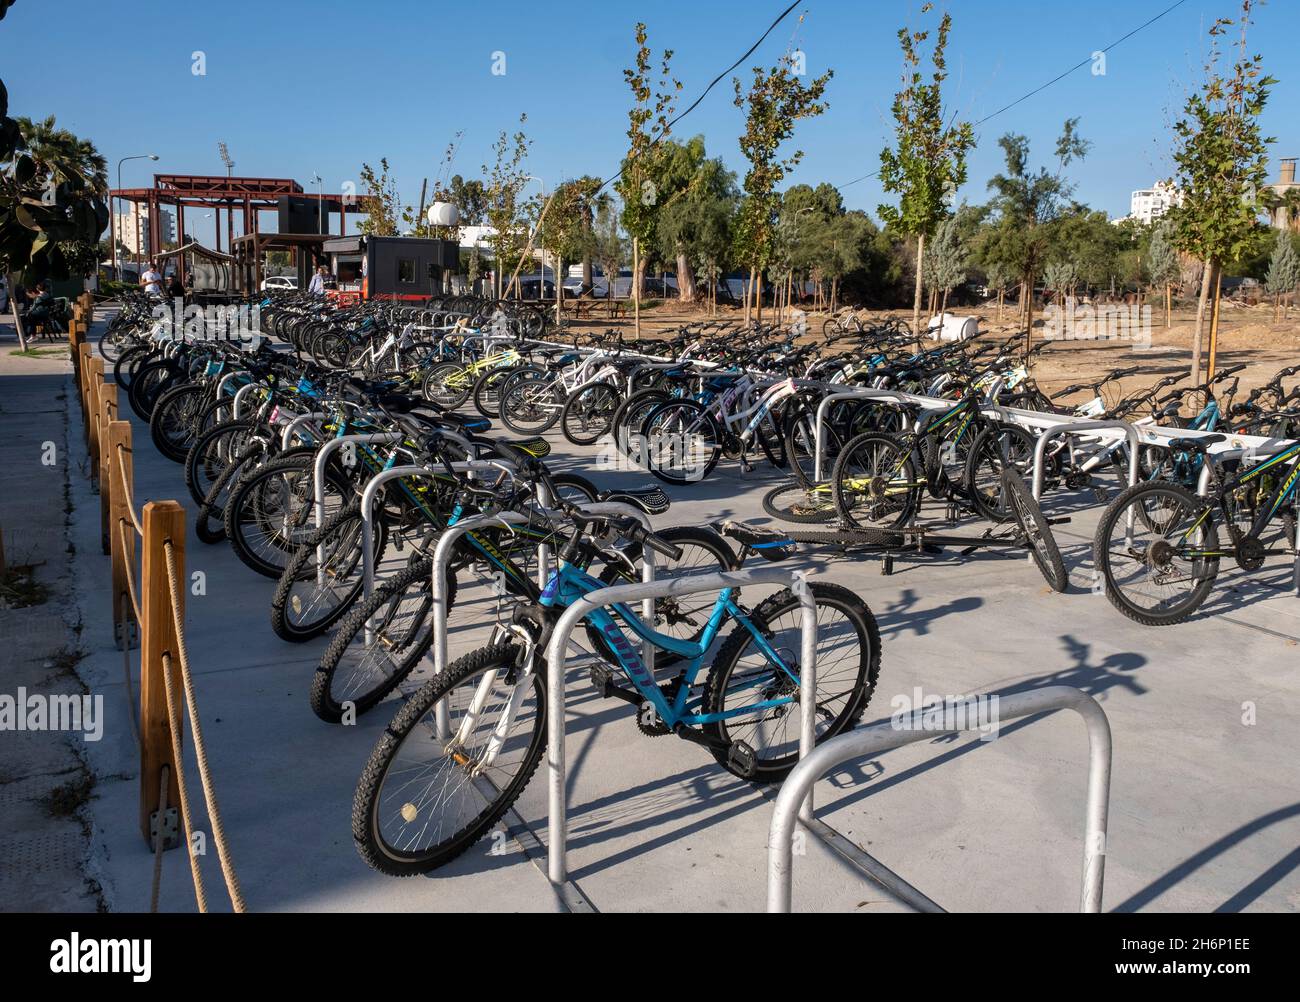 Bikes for hire. Varosha, Famagusta, Cyprus had been closed to the world  since the Turkish invasion in 1974 until it was opened up in October 2020  Stock Photo - Alamy